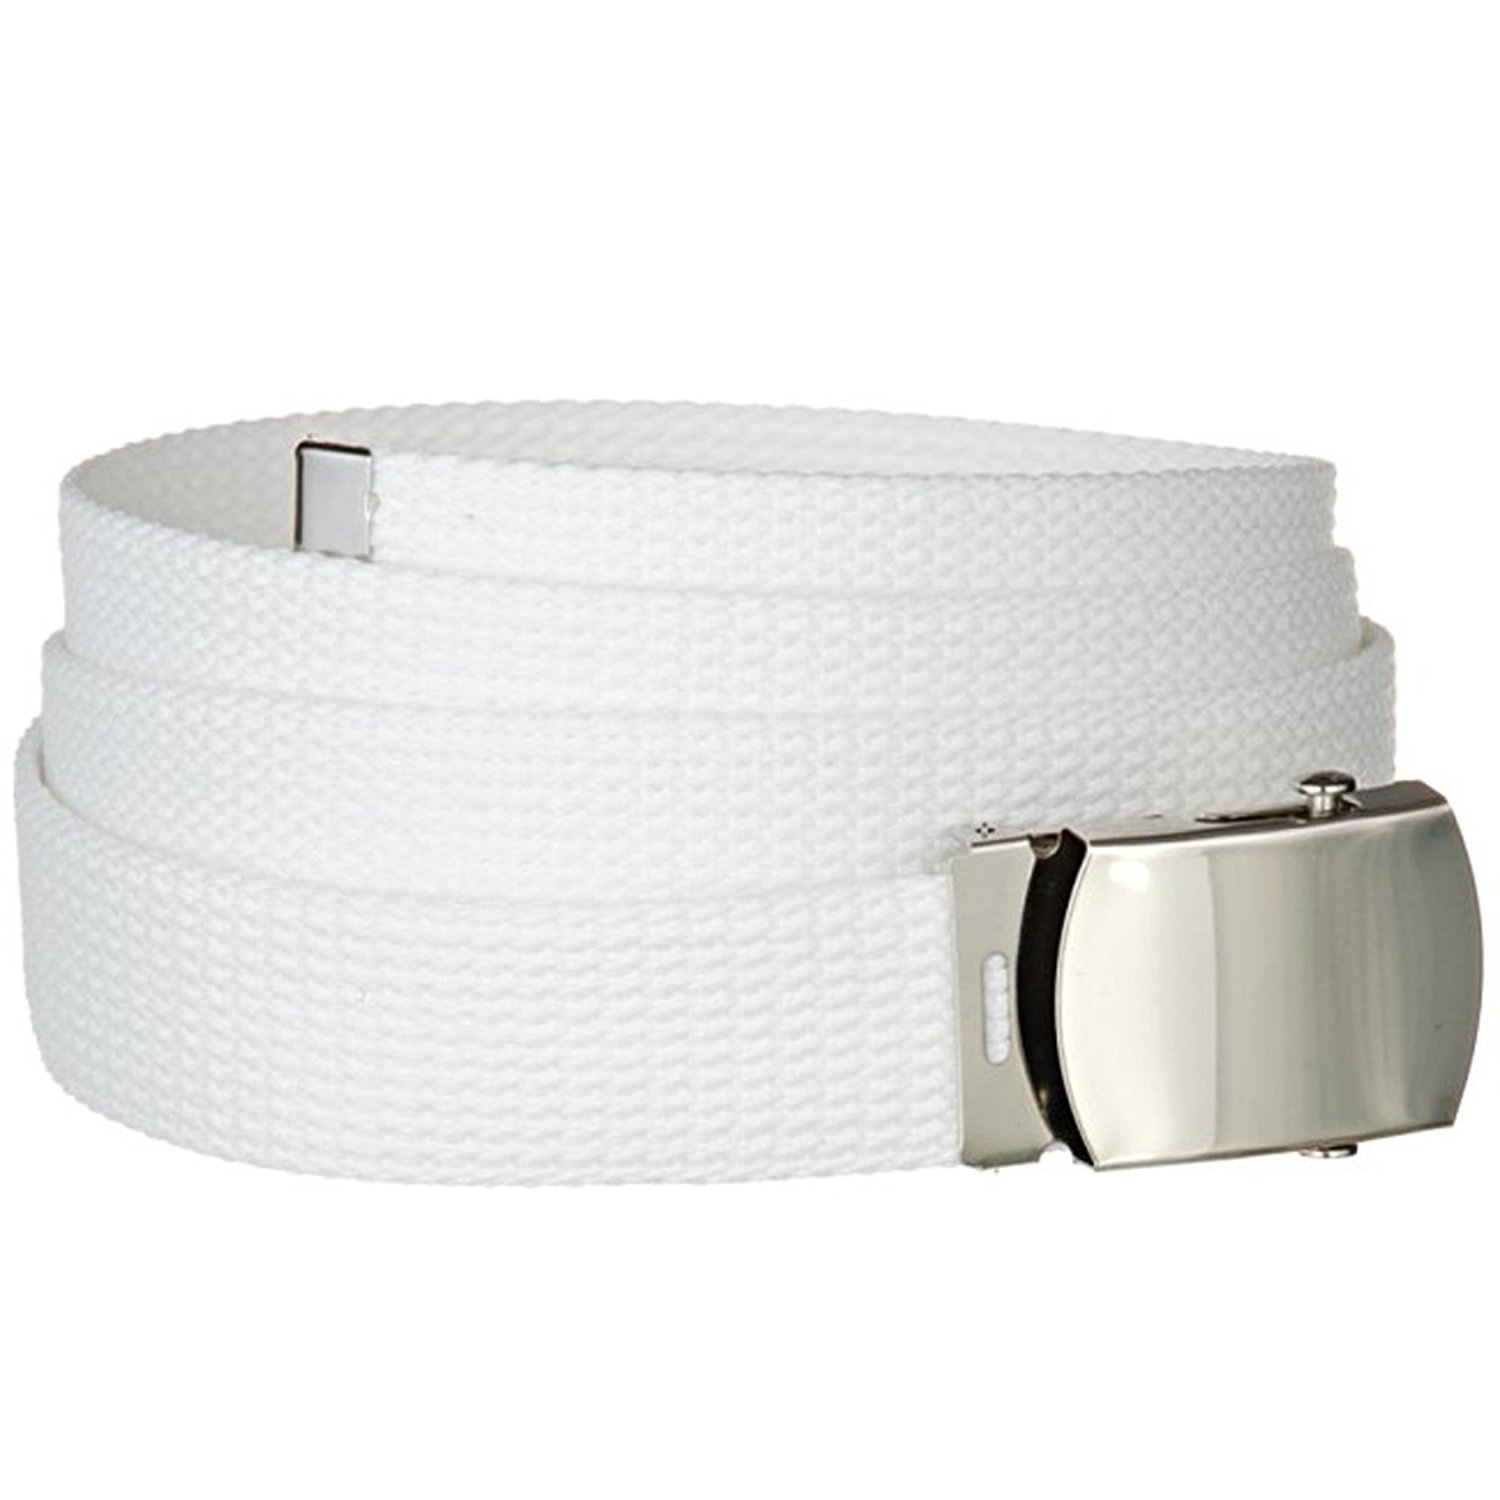 Amazon.com: White One Size Canvas Military Web Belt With Silver ...